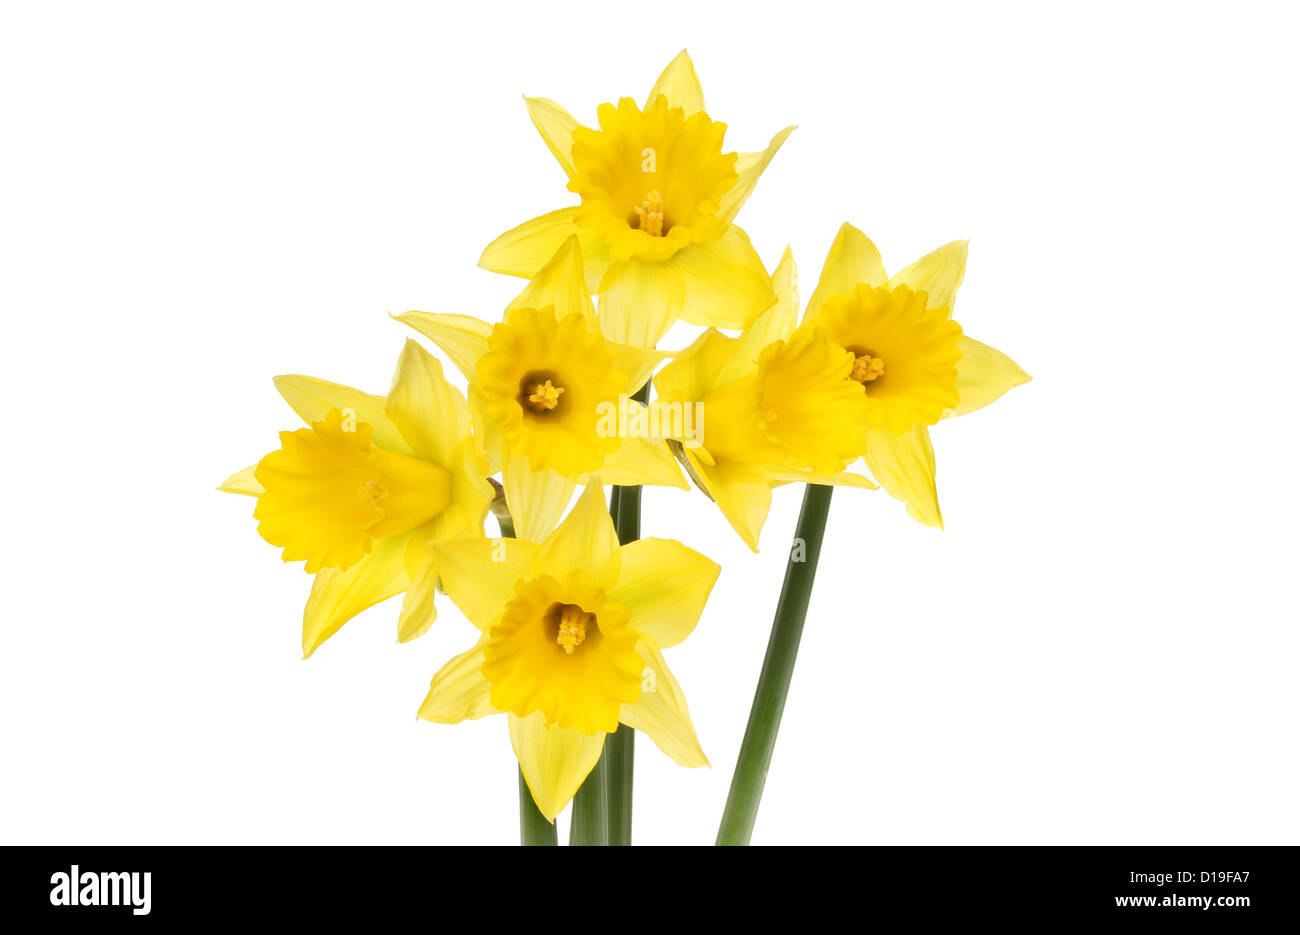 Group of yellow daffodil flowers isolated against white Stock Photo